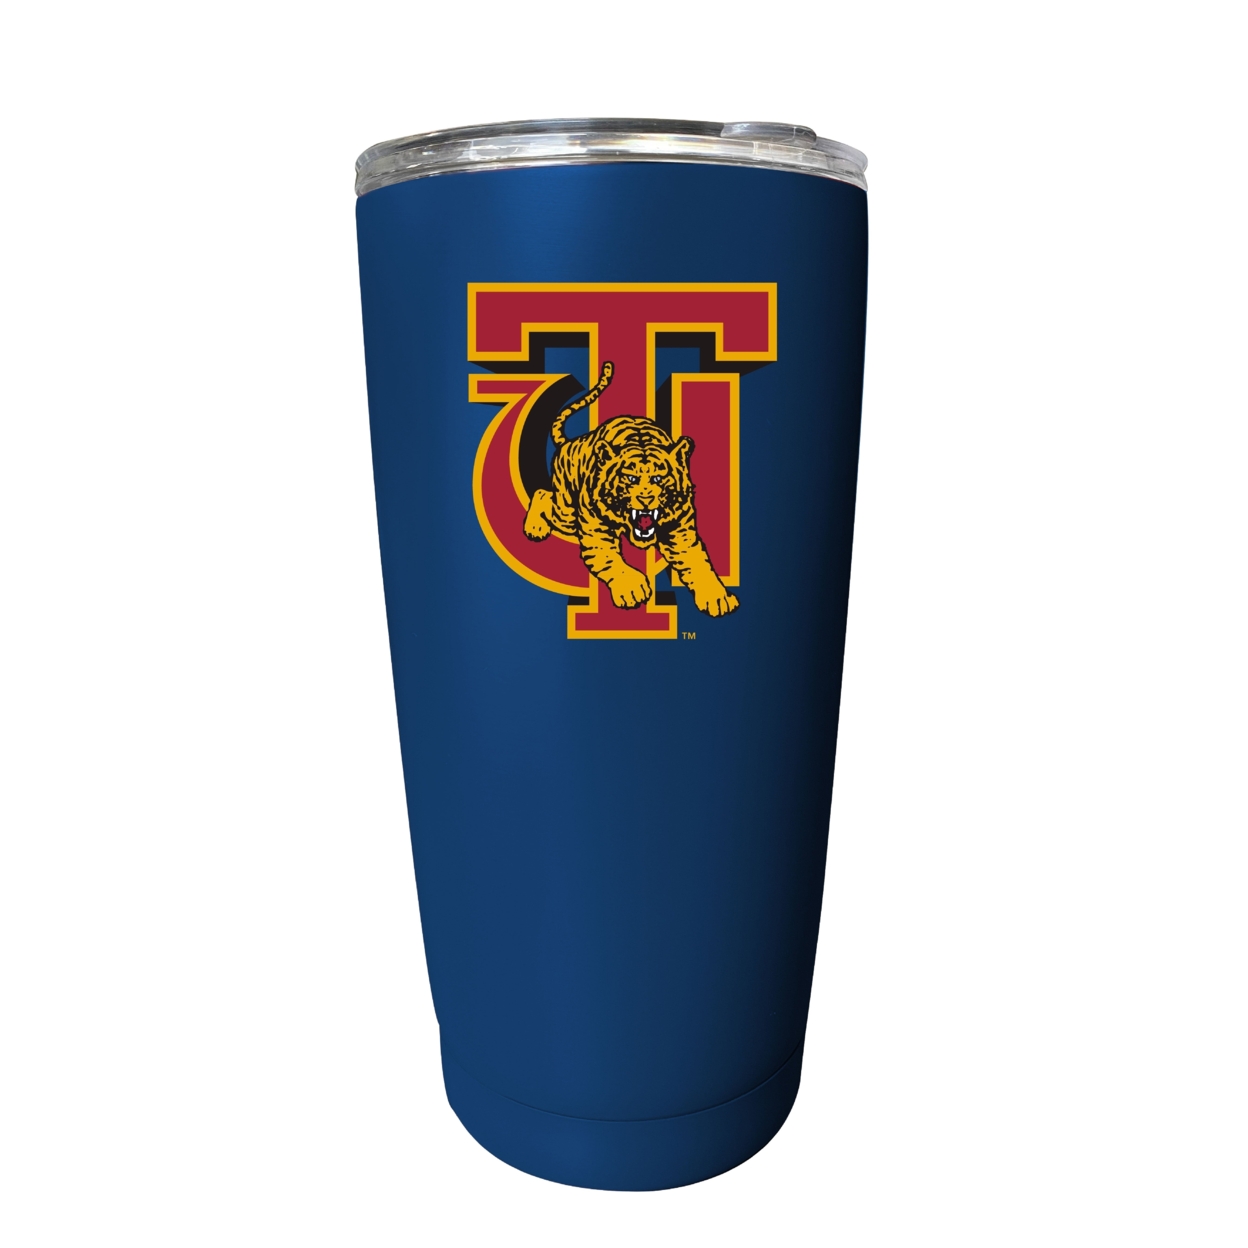 Tuskegee University 16 Oz Insulated Stainless Steel Tumbler - Choose Your Color. - Navy